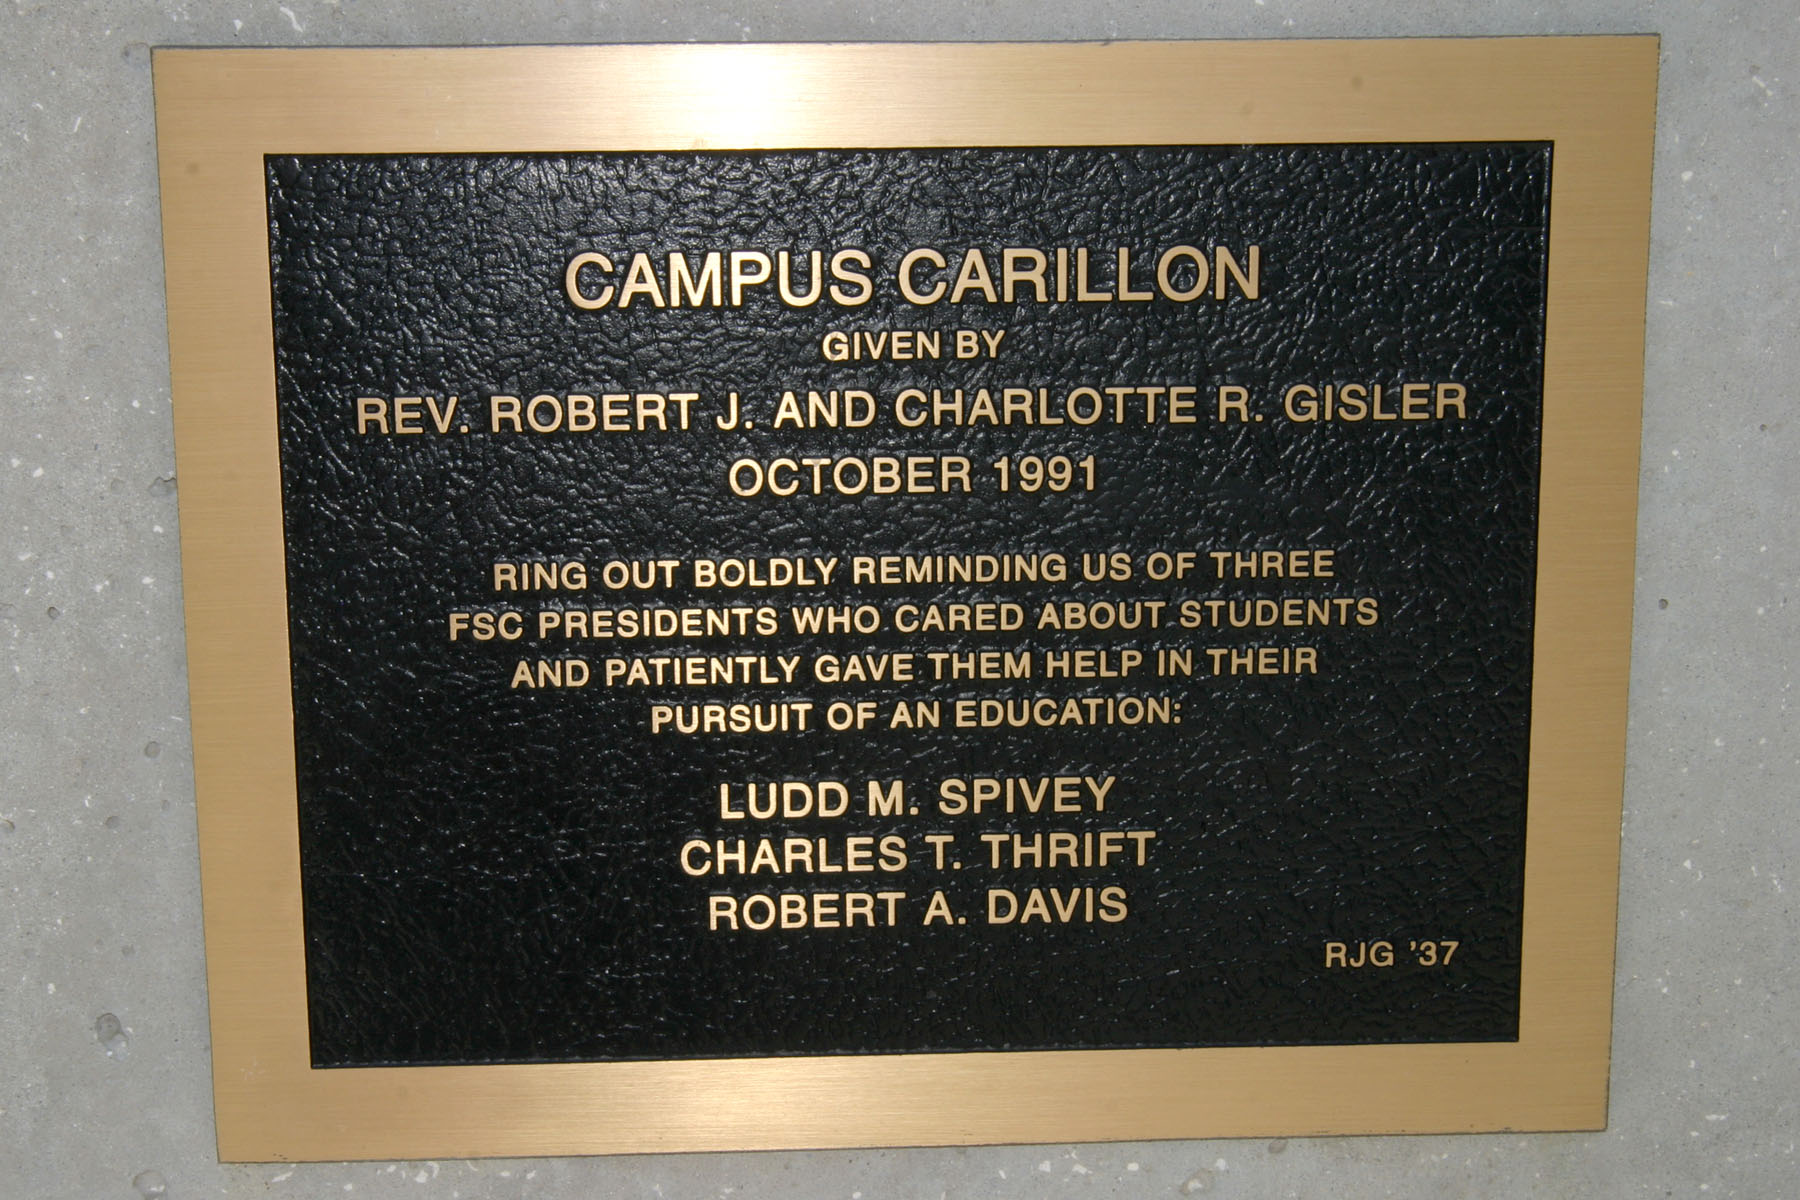 Campus Carillon. Given by Rev. Robert J. and Charlotte R. Gisler. October 1991. Ring out boldly reminding us of three FSC presidents who cared about students and patiently gave them help in their pursuit of an education: Ludd M. Spivey, Charles T. Thrift, Robert A. Davis. RJG ’37.